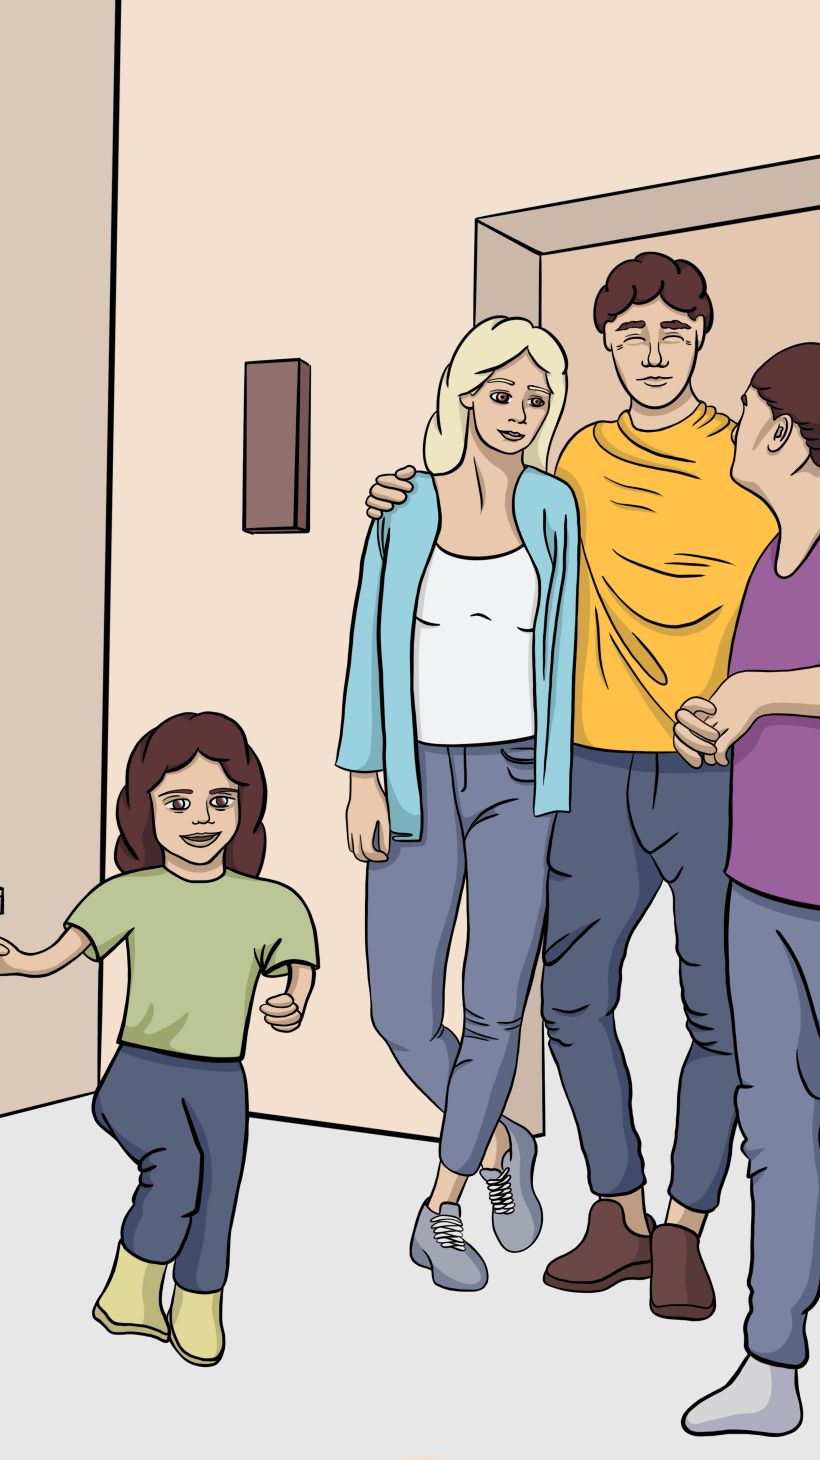 An illustration of a family of four looking happy standing in an empty room with boxes.